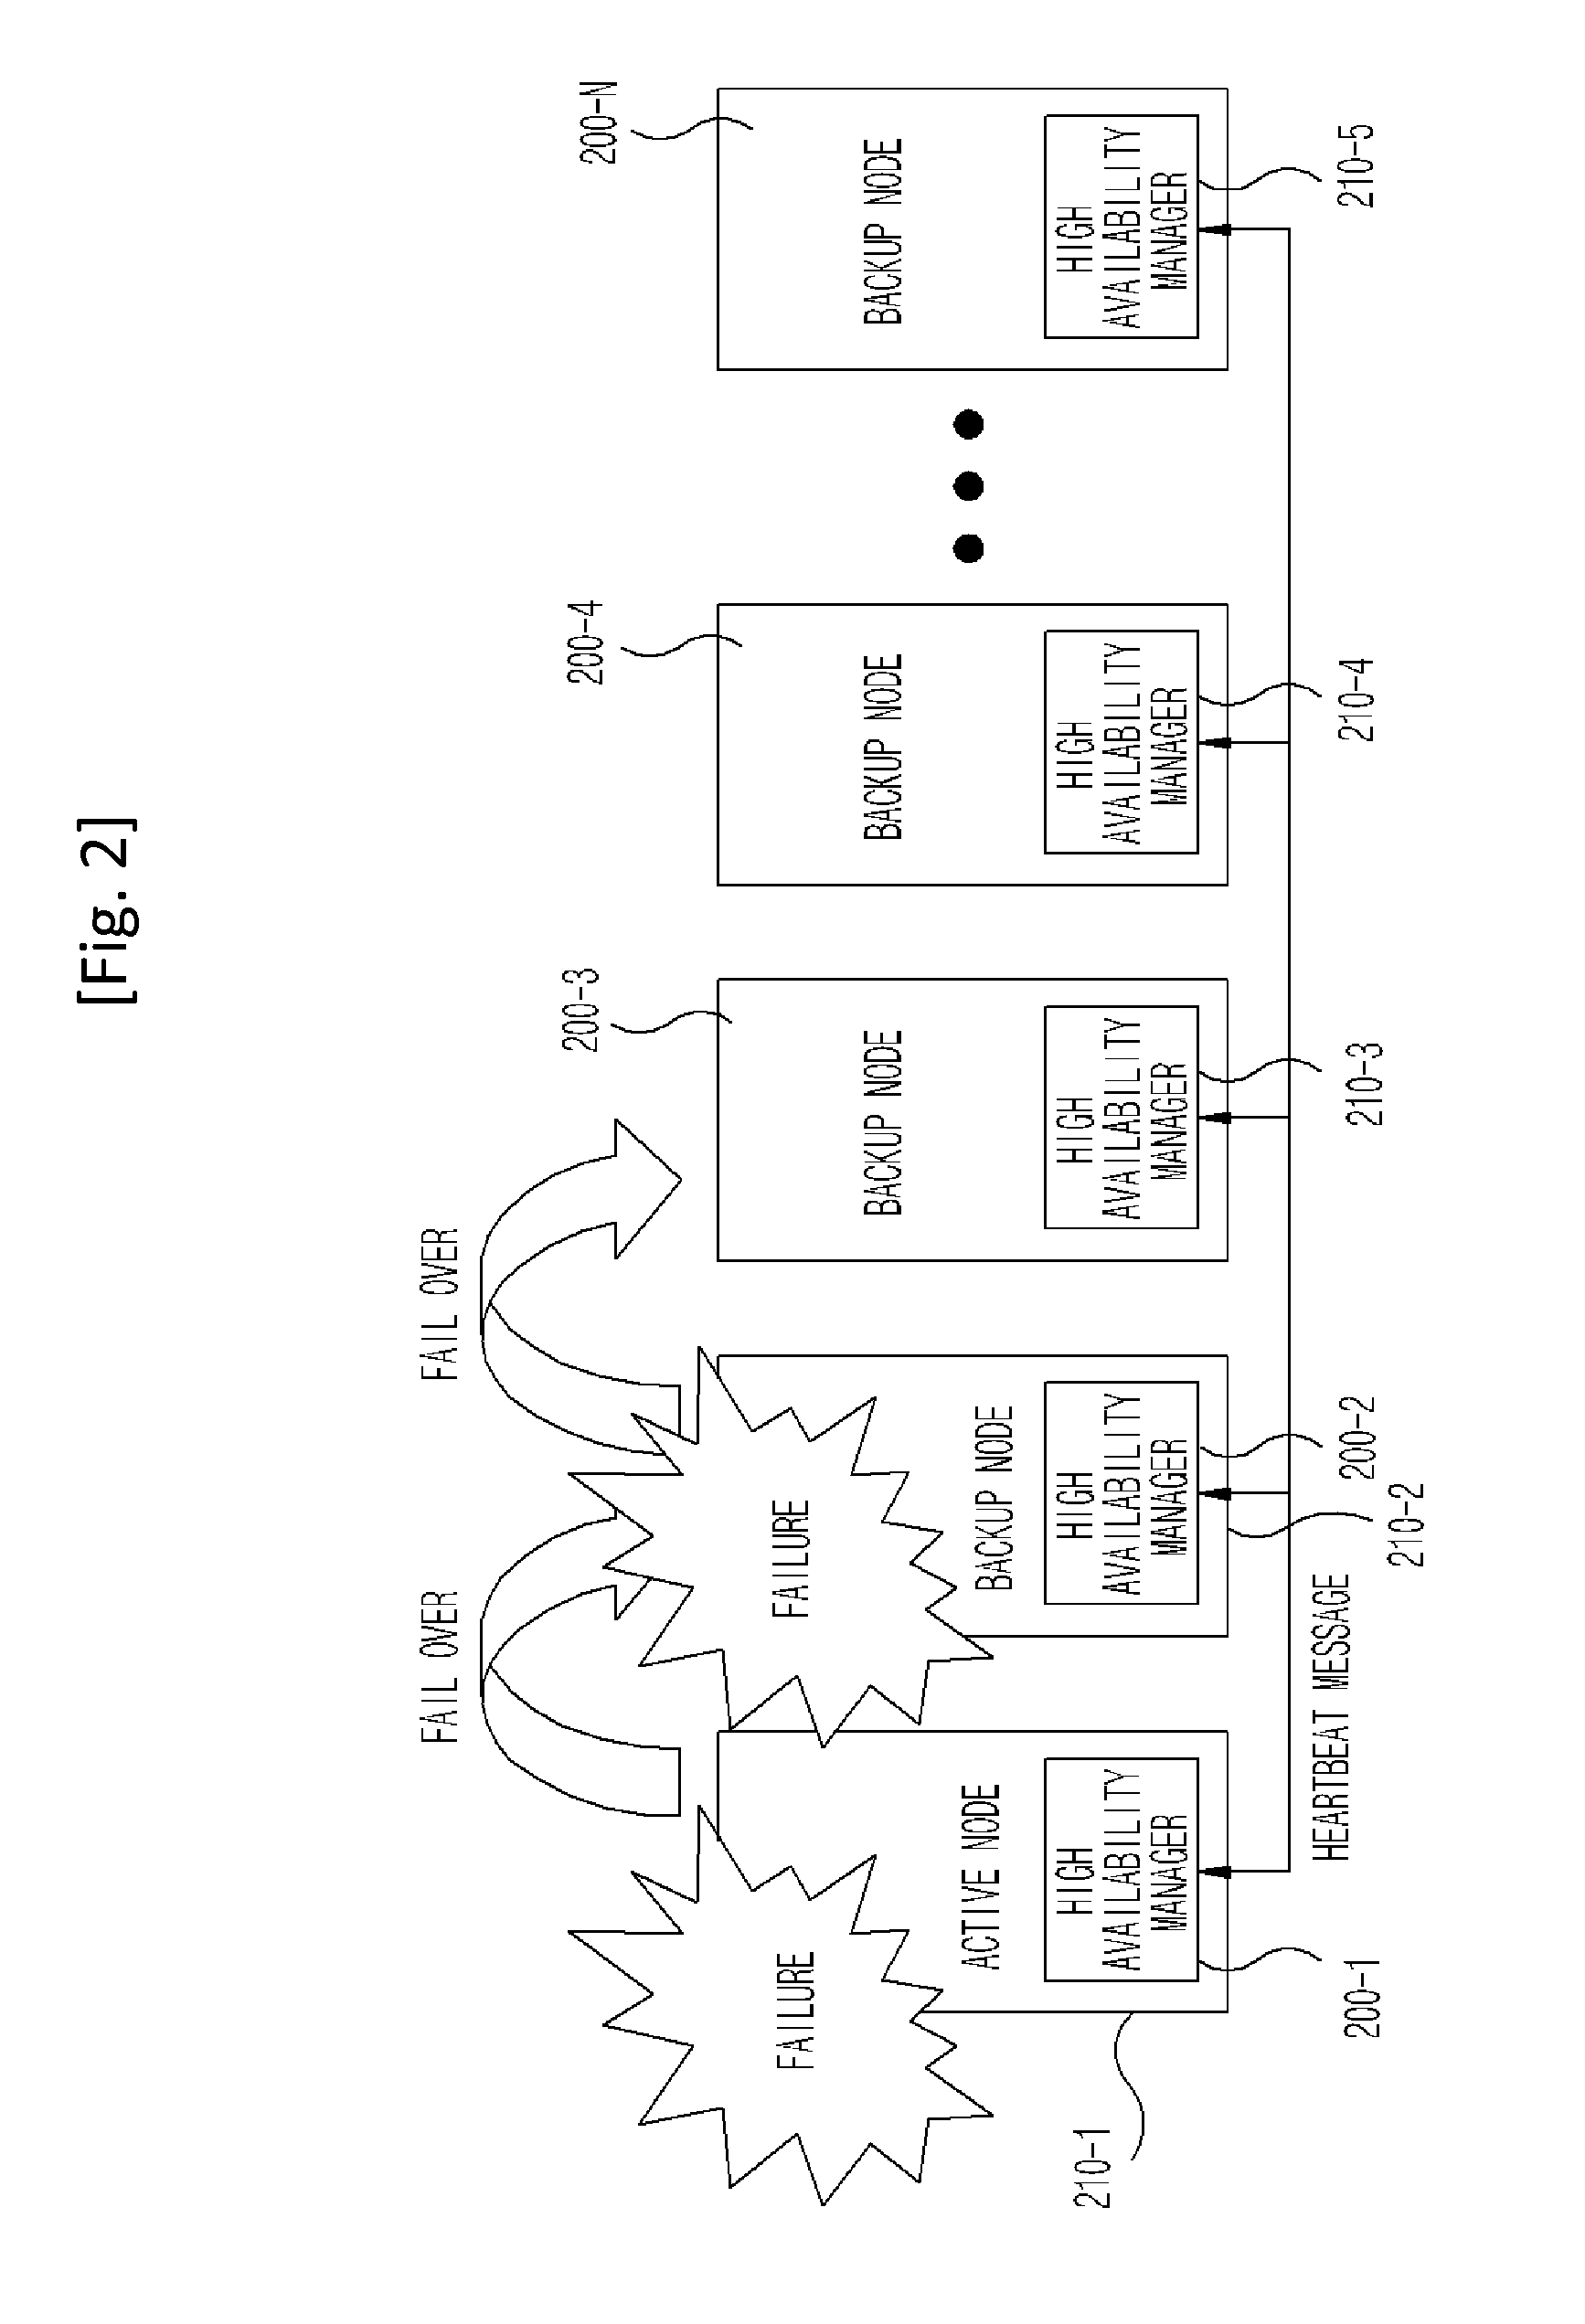 Virtualization based high availability cluster system and method for managing failure in virtualization based high availability cluster system